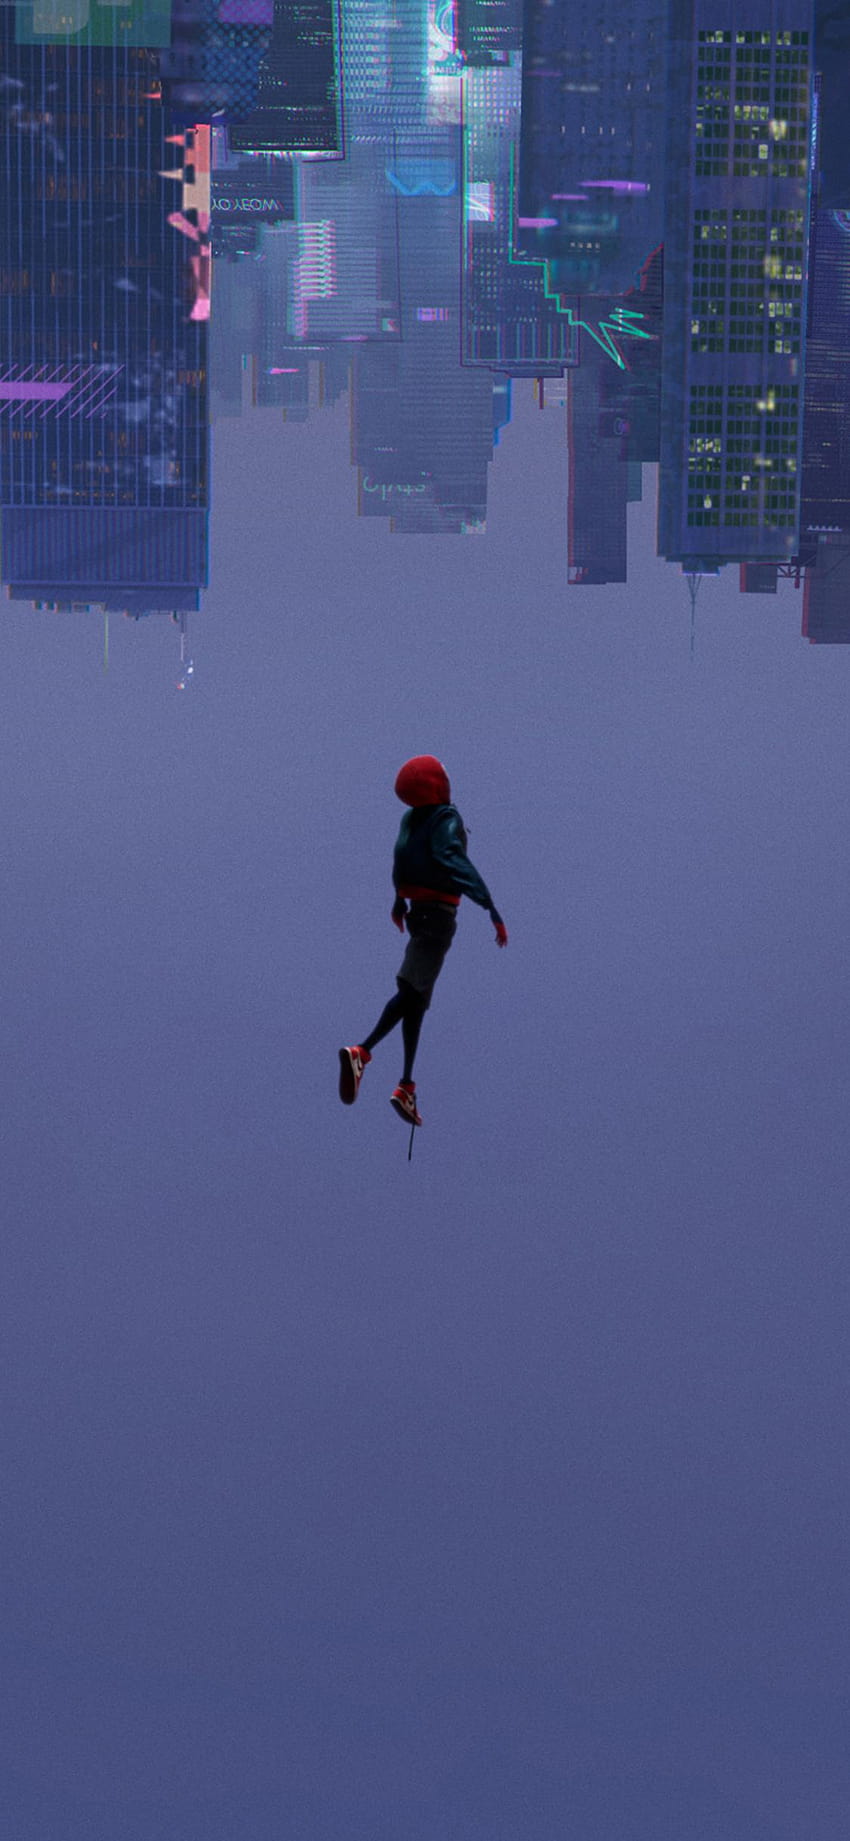 1125x2436 SpiderMan Into The Spider Verse 2018 Movie Iphone XS, スパイダーマン iphone xr HD電話の壁紙